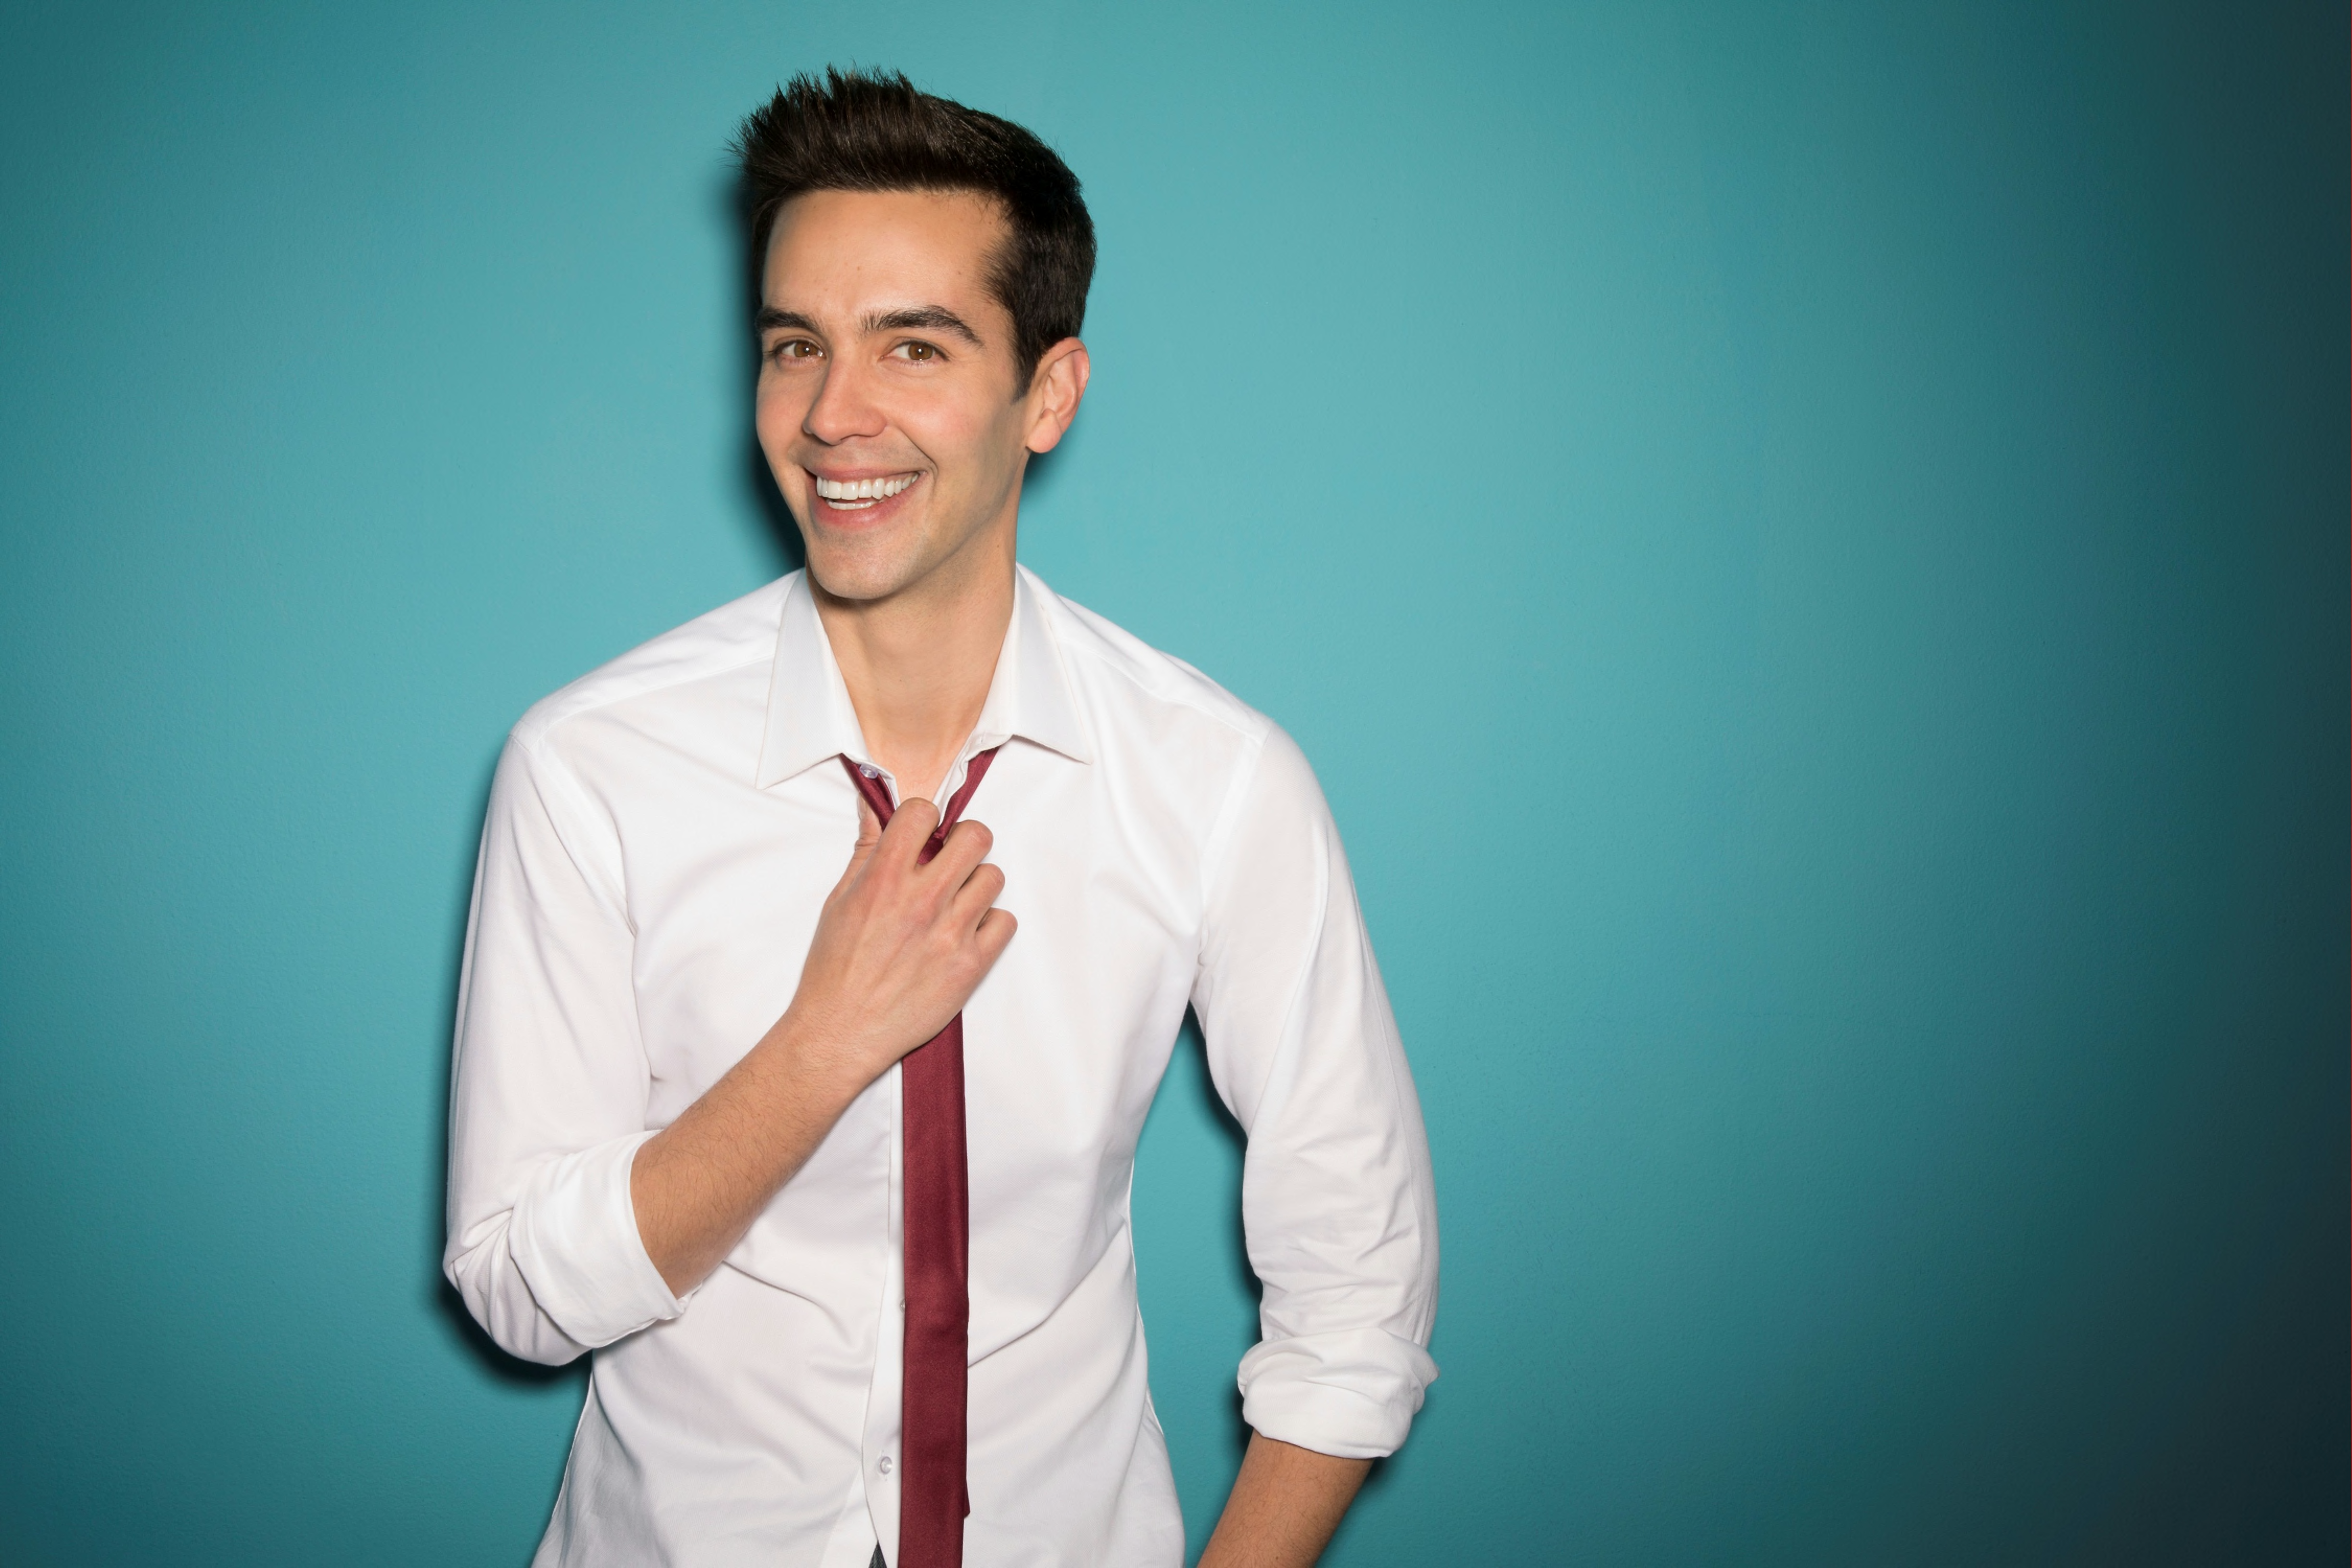 The Carbonaro Effect A moment with Michael Carbonaro himself